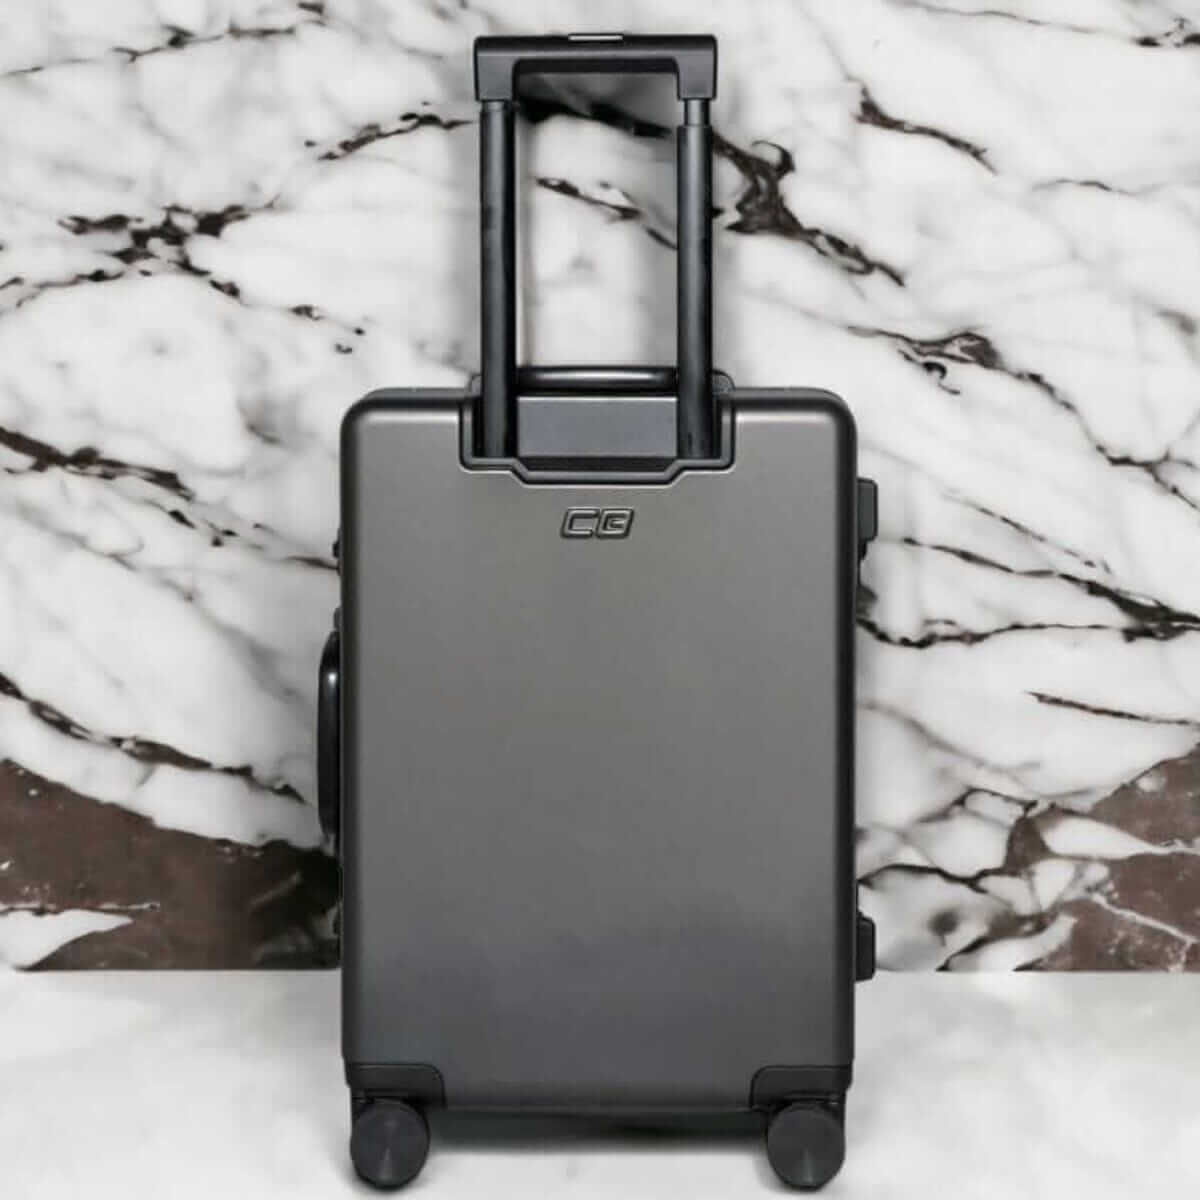 Luggage Weight Scale Bags With Tracker Suitcase With Usb Charging